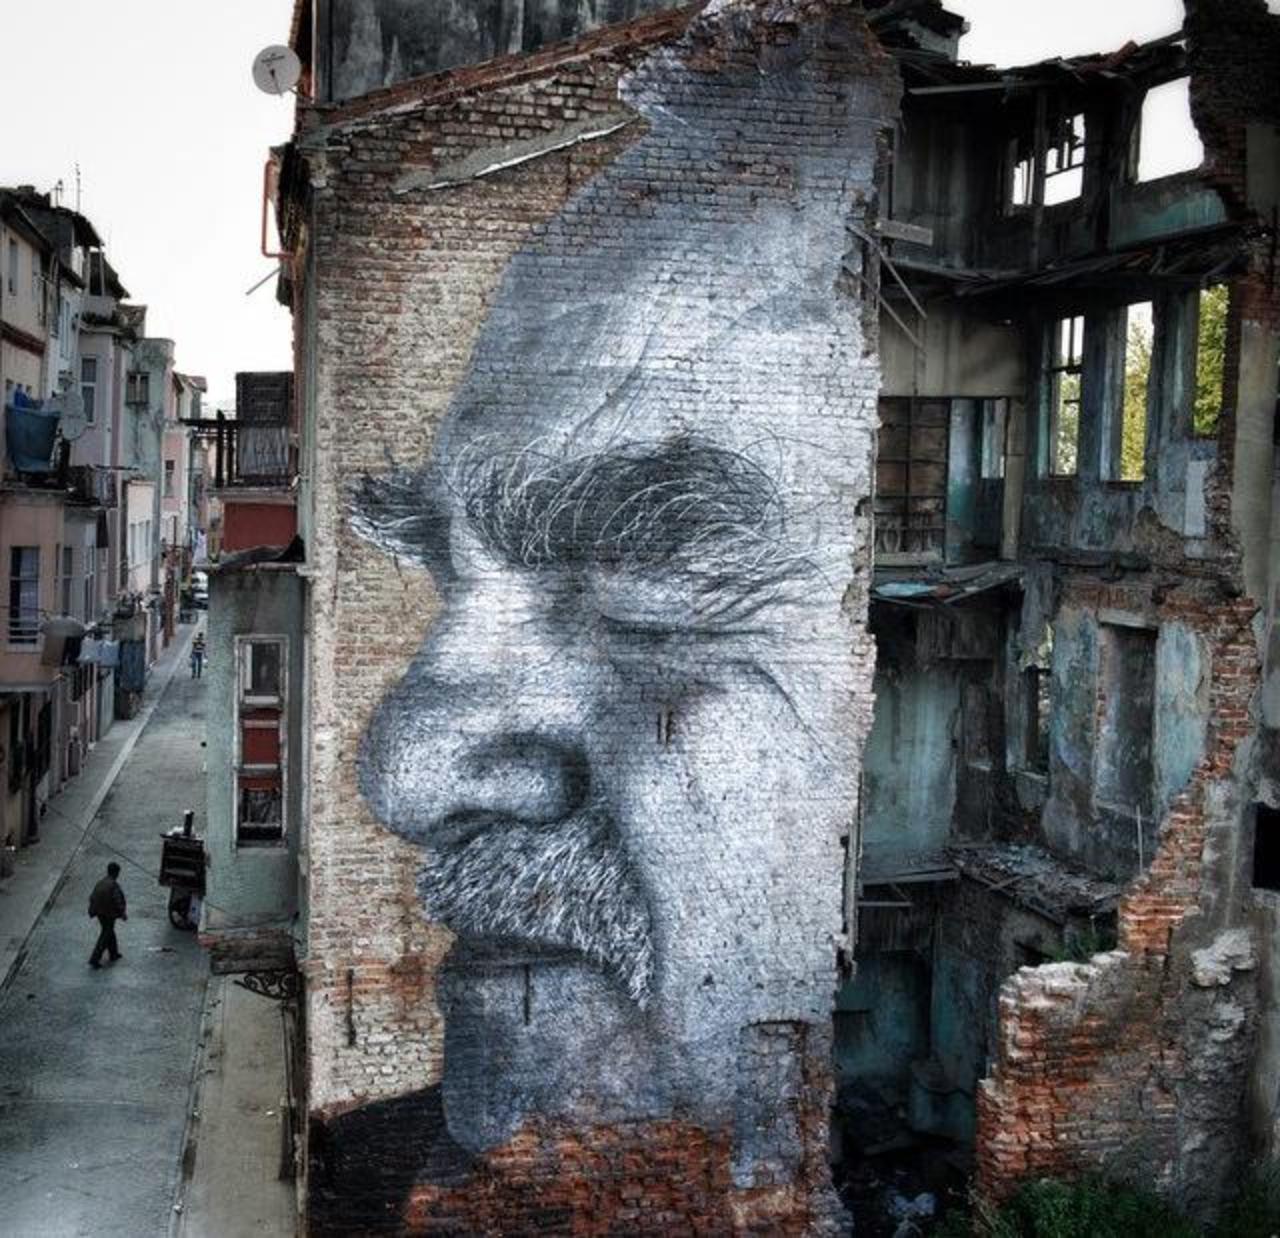 Street Art by JR in Istanbul & after local police painted over it 

#art #arte #graffiti #streetart http://t.co/crlxS2PD4h